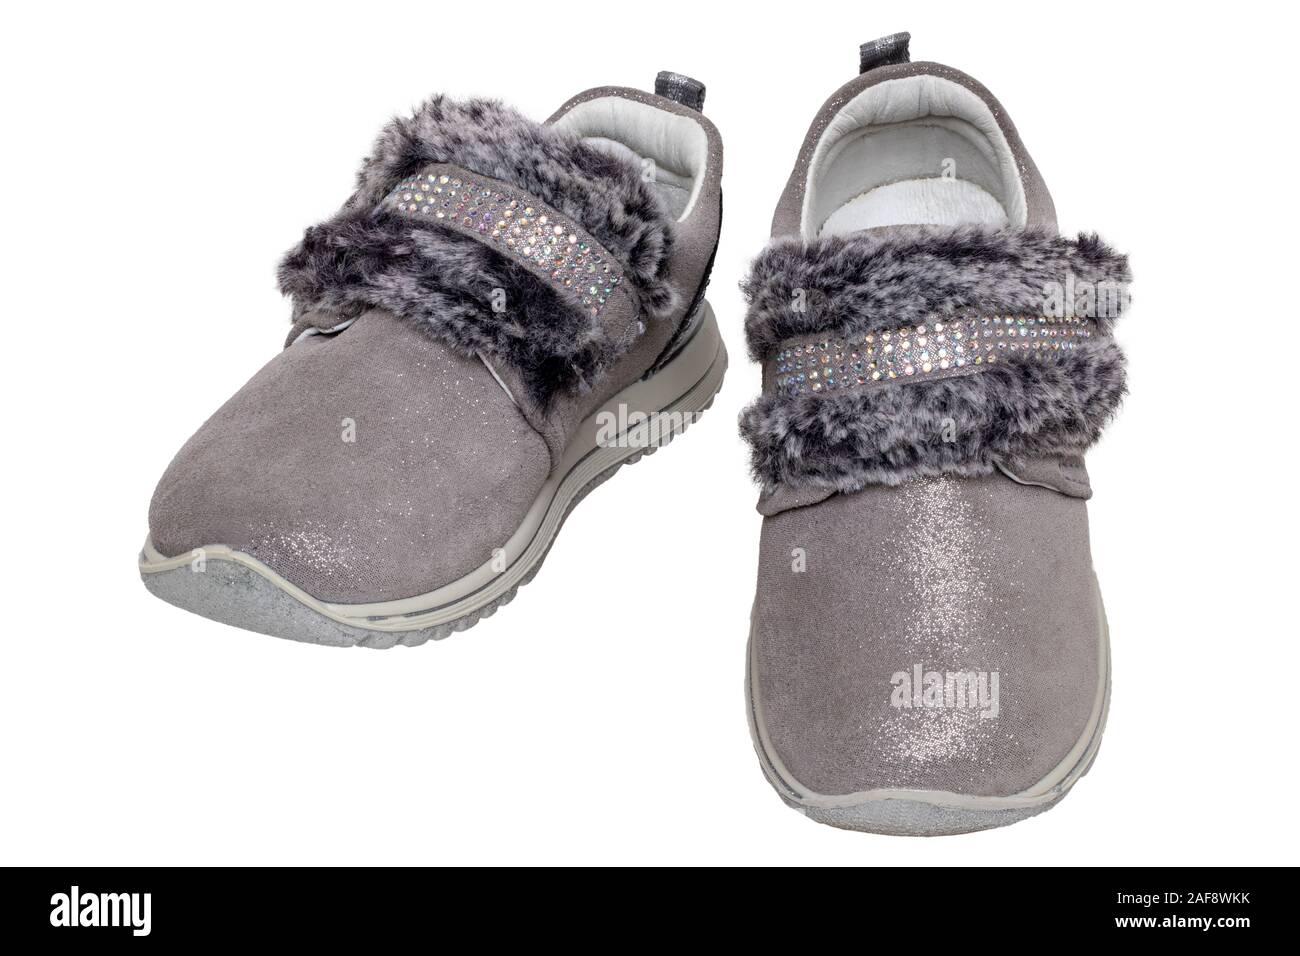 Child shoes fashion. Close-up of a pair beautiful gray silver suede sneaker or sports shoes for girls with fur and rhinestone decoration isolated on a Stock Photo